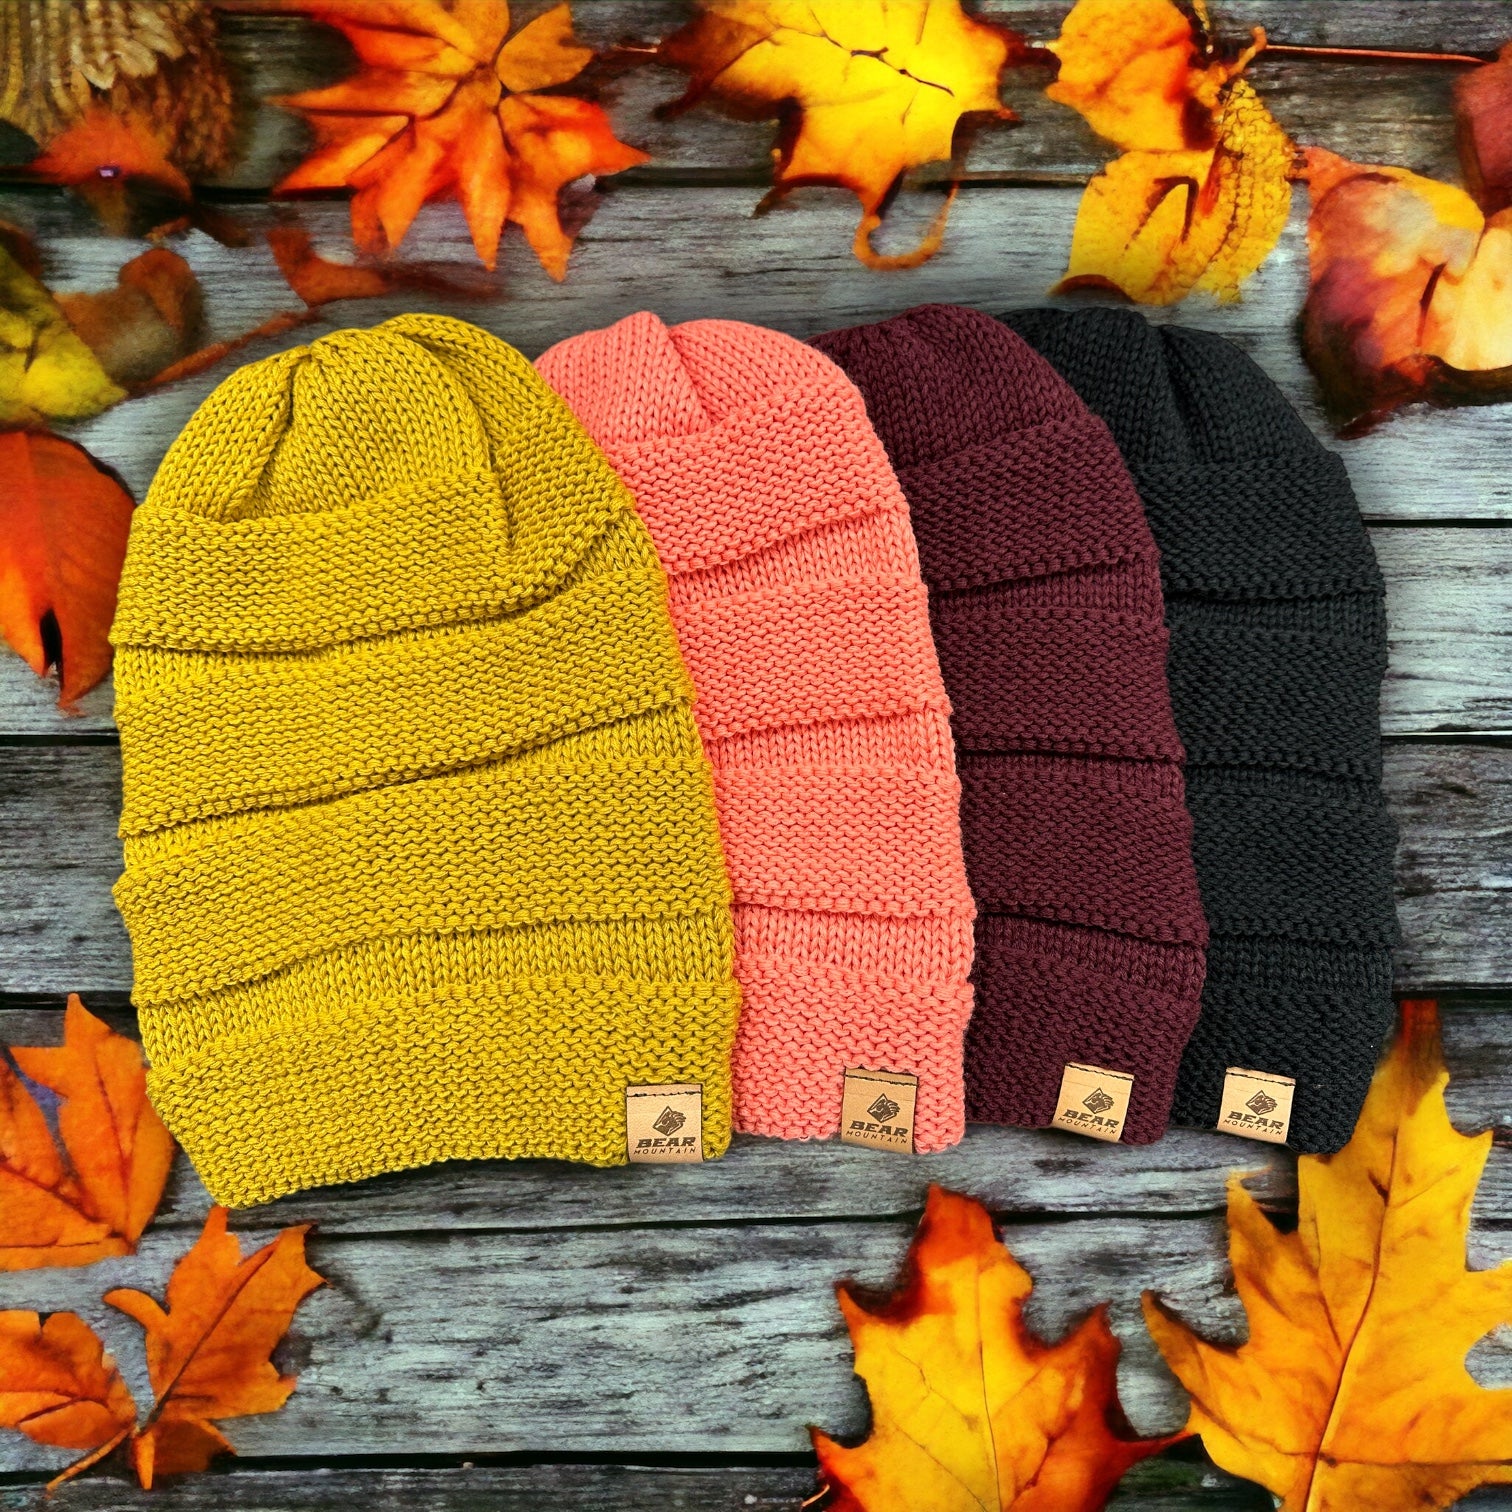 Bear Mountain slouch beanies in colors: rust, coral, burgandy, and black